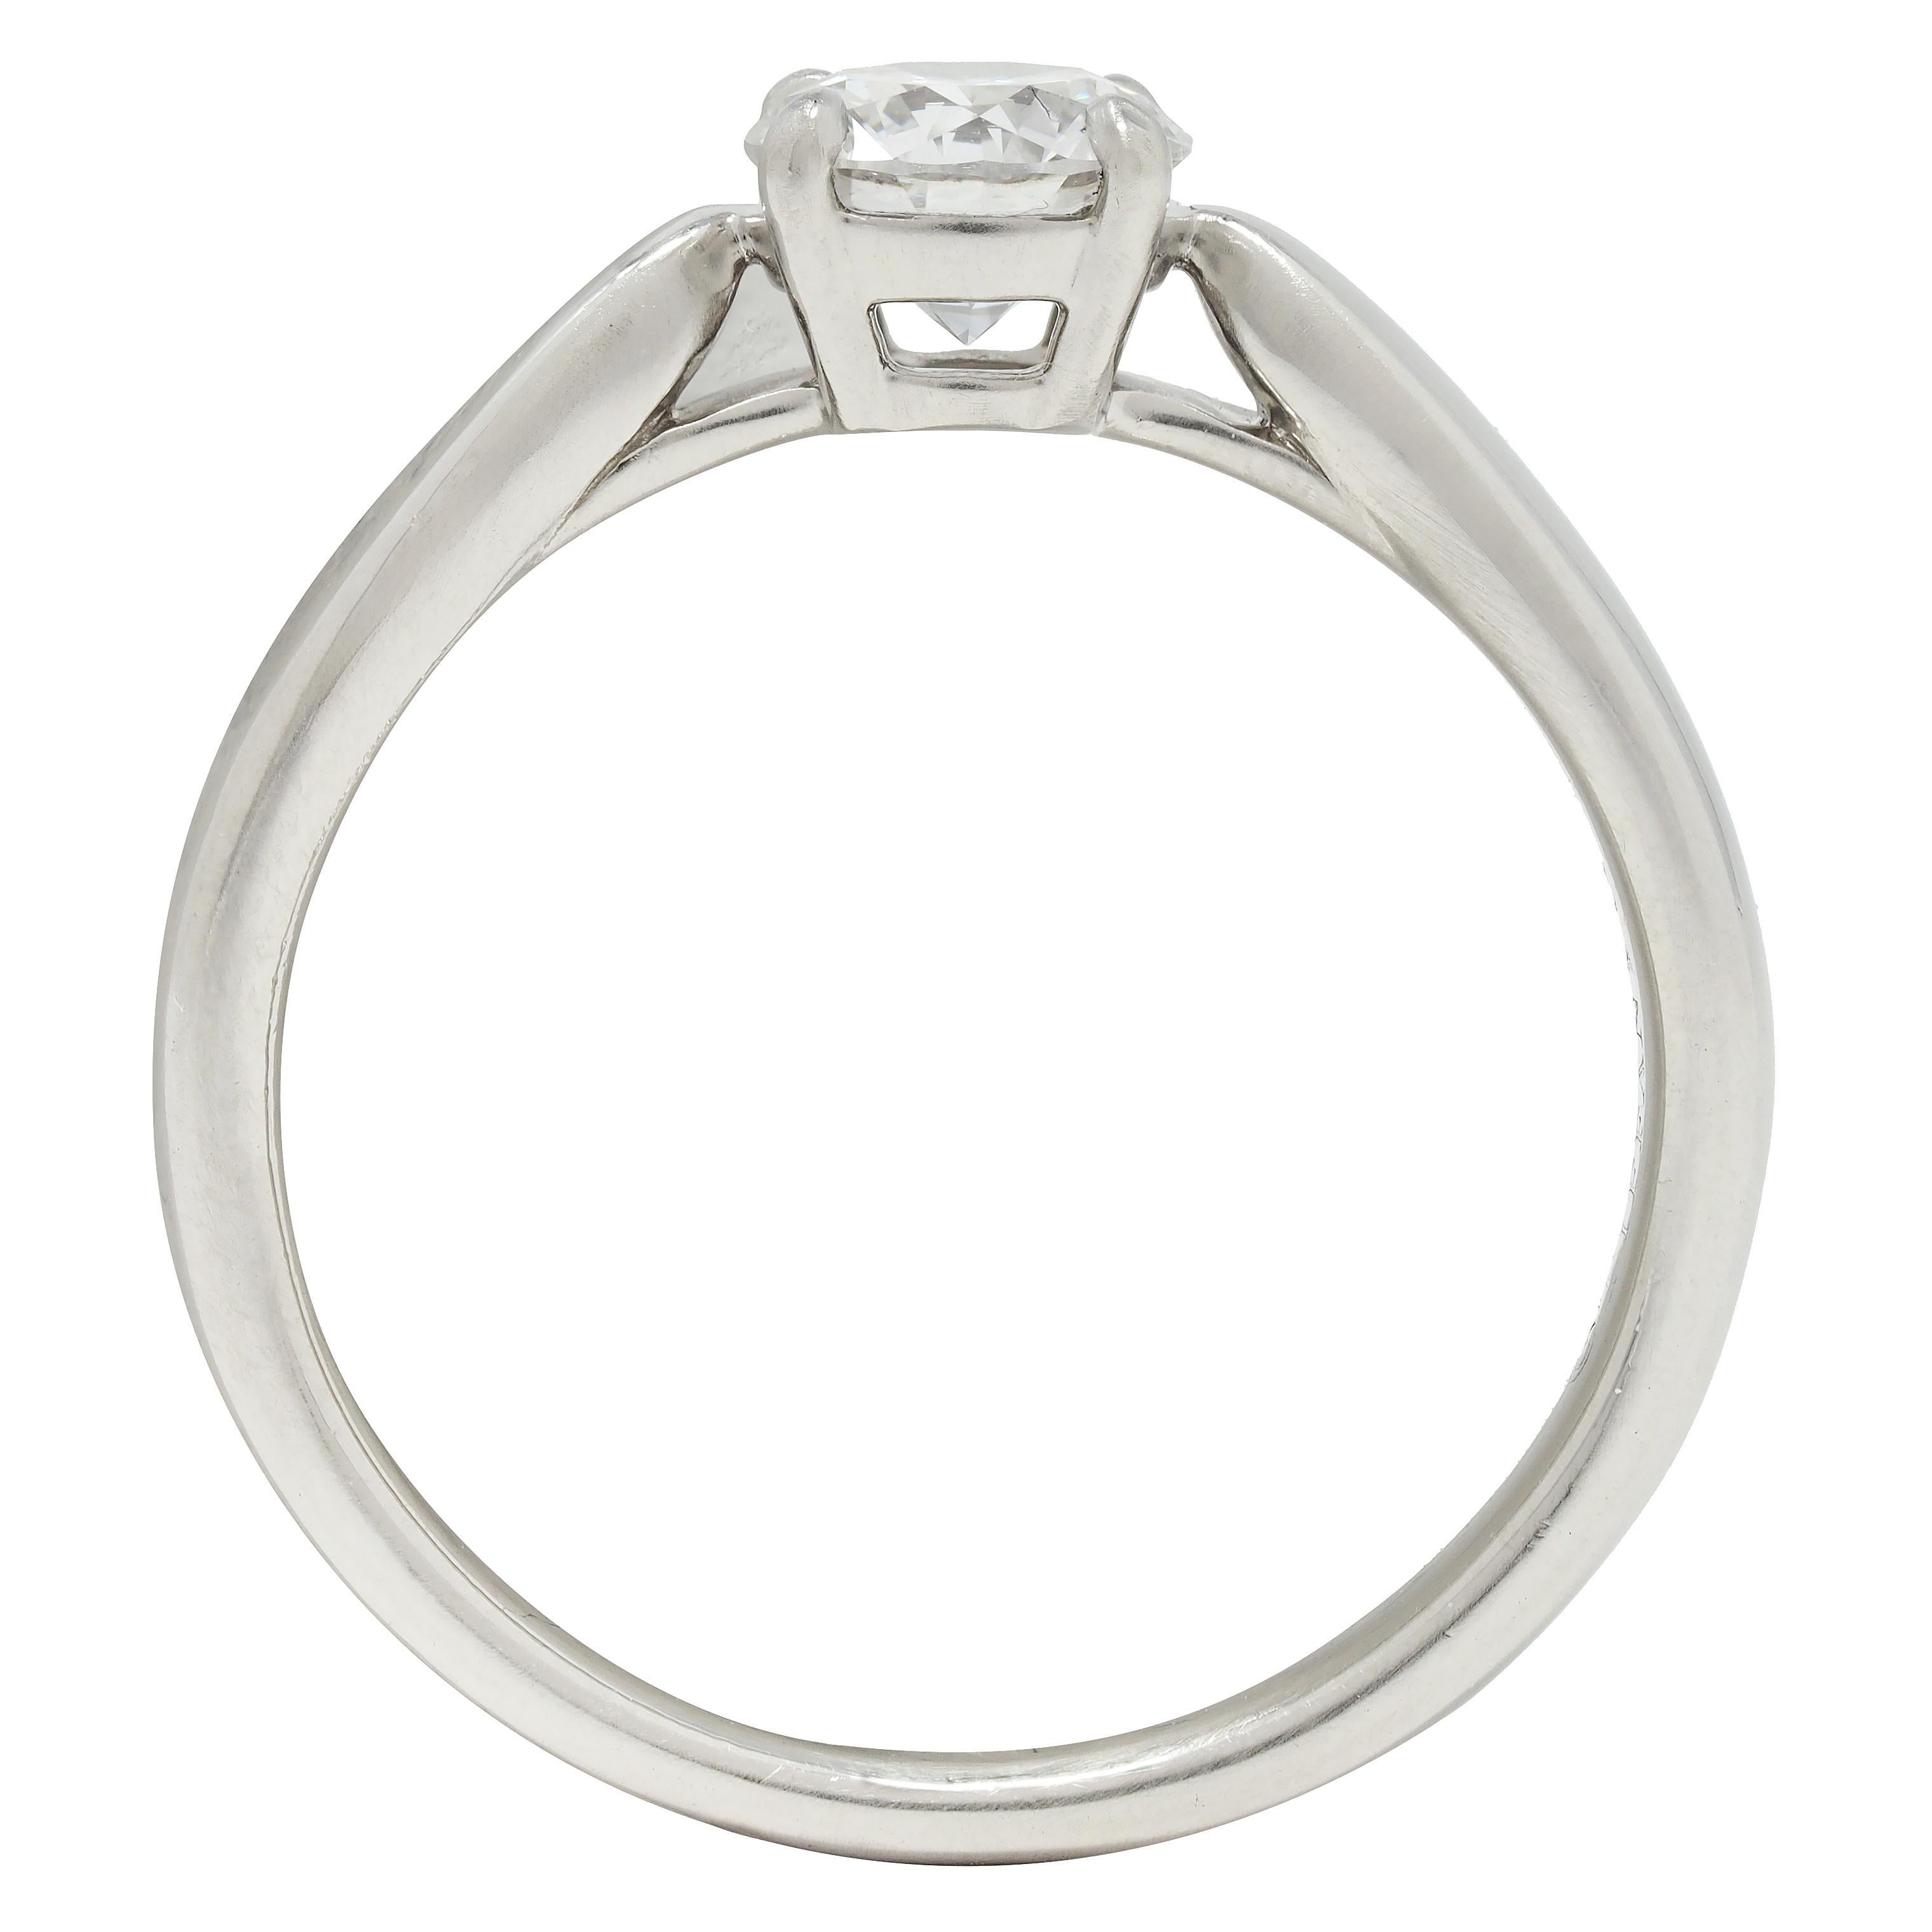 Tiffany & Co. 0.48 CTW Diamond Platinum Harmony Solitaire Engagement Ring GIA For Sale 4